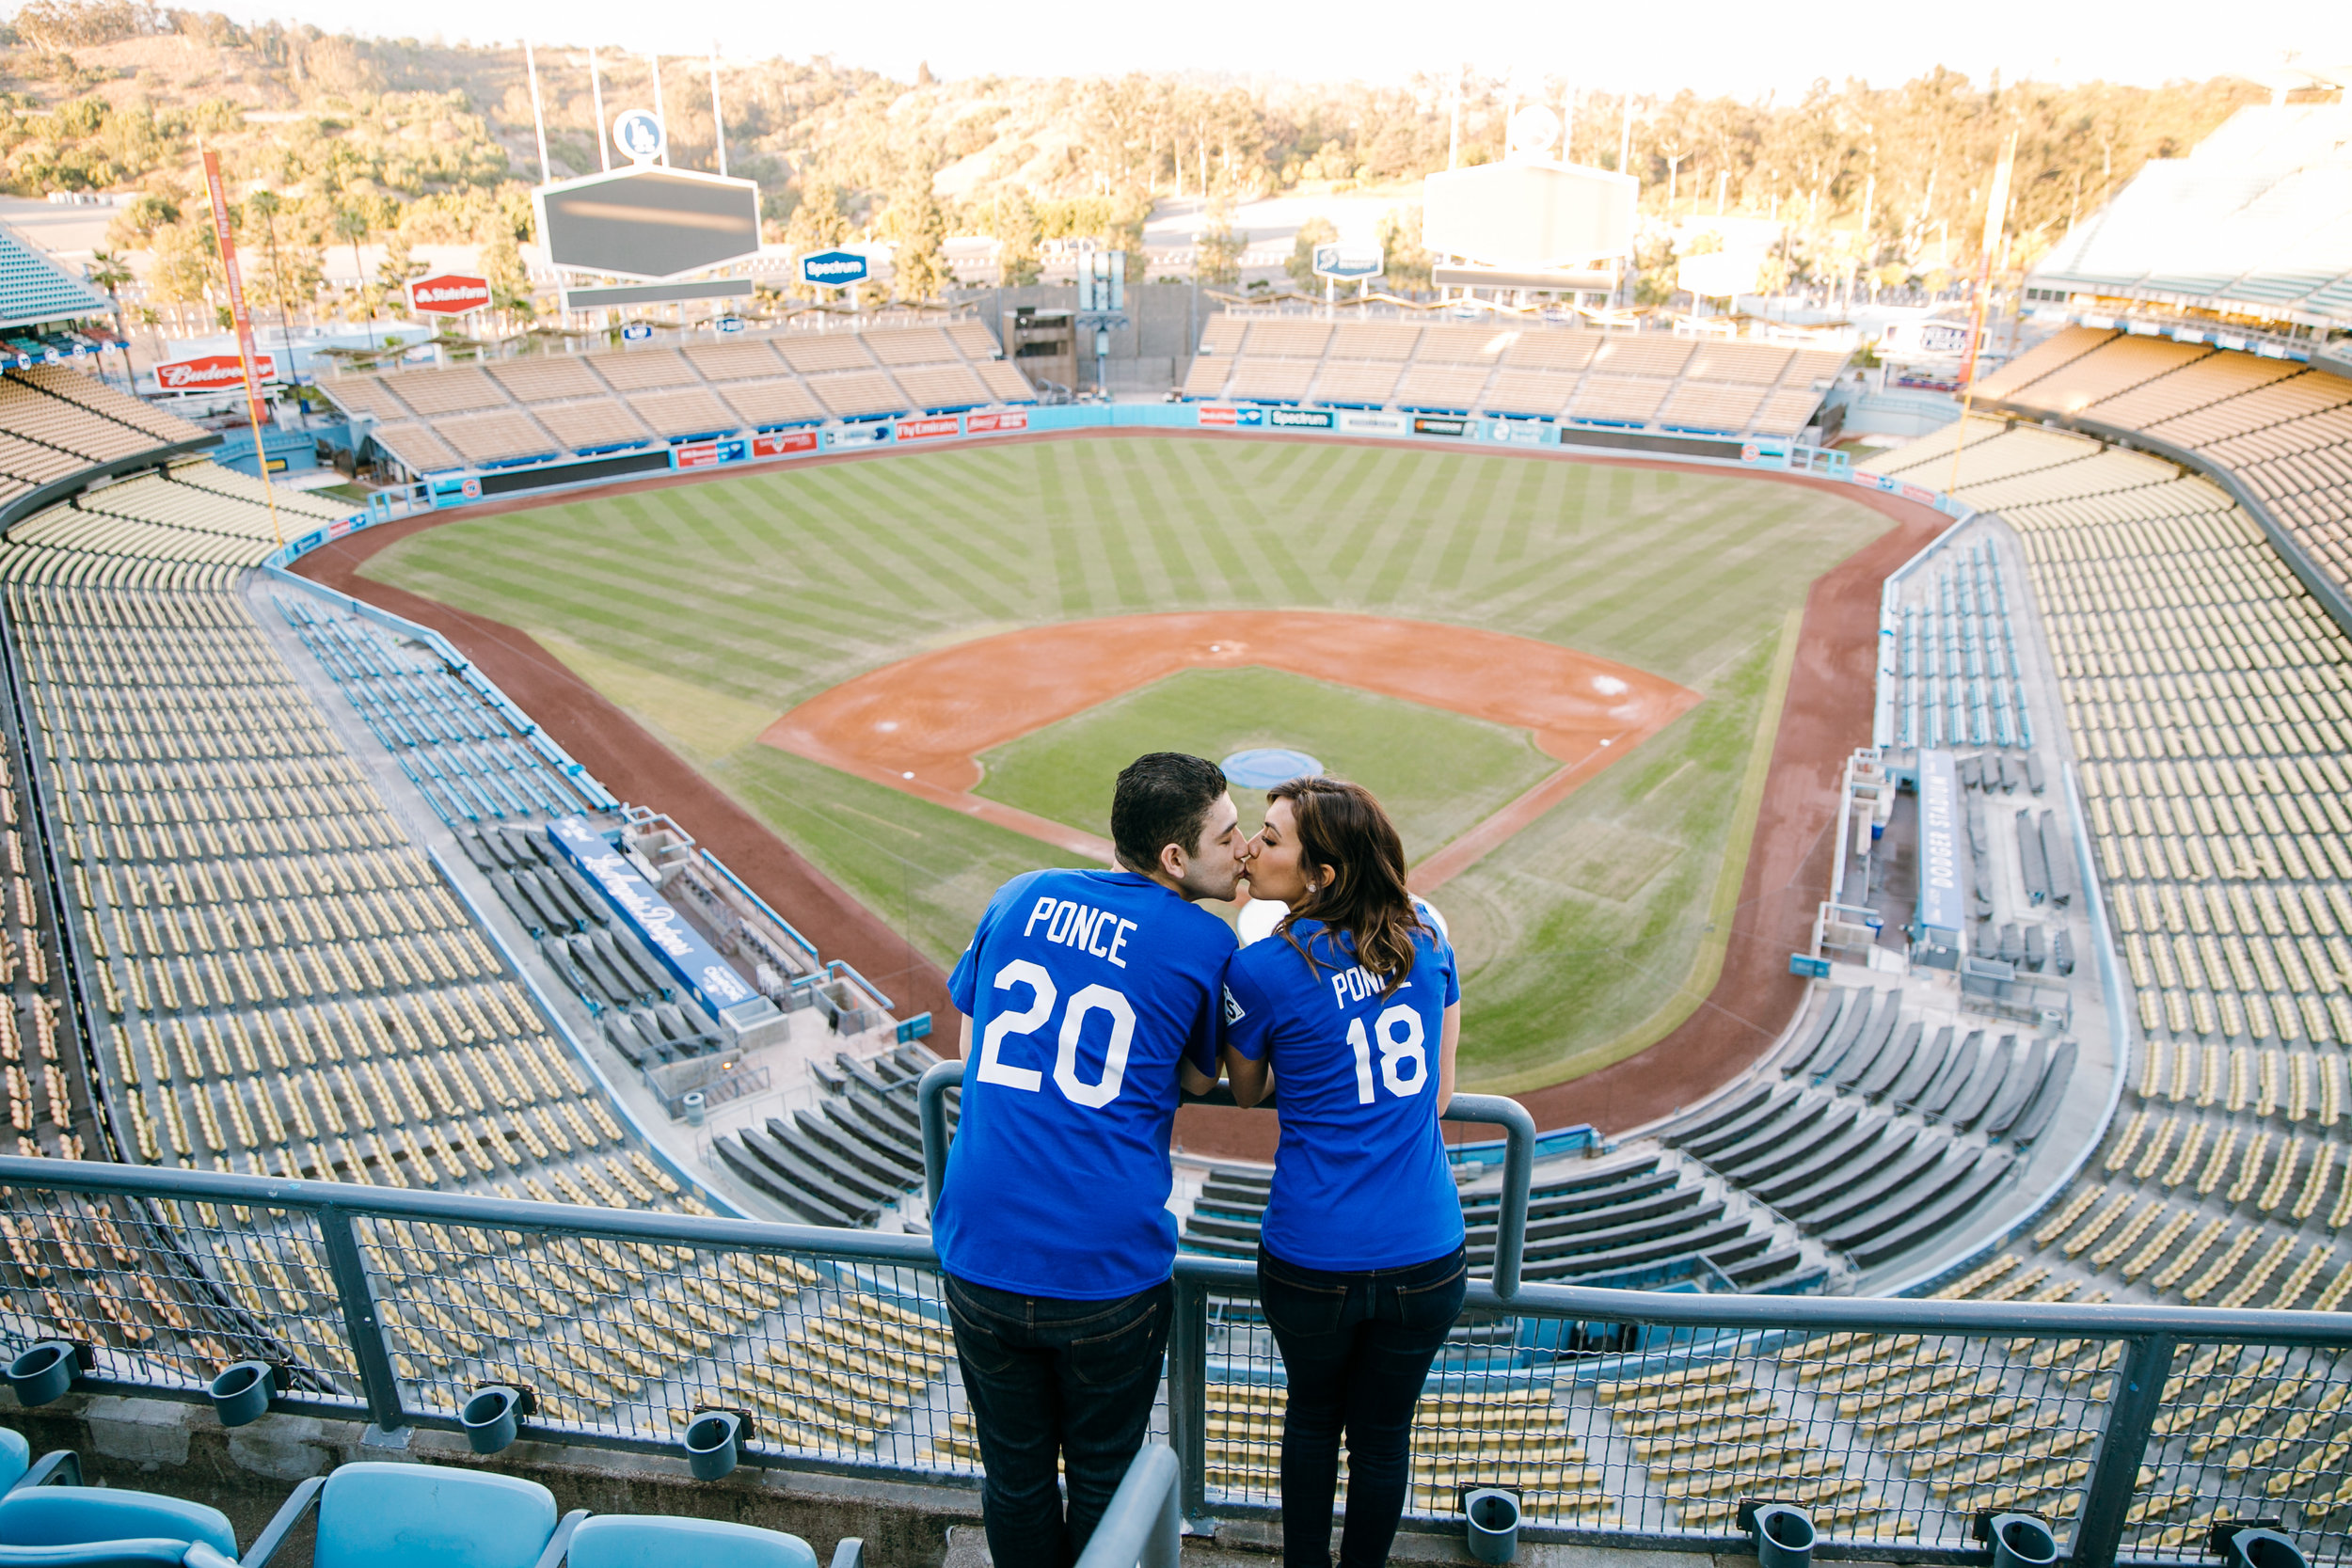 Los Angeles engagement photographer, Southern California engagement photographer, LA engagement photographer, Dodger Stadium engagement session, Dodgers, SoCal engagement photographer, LA Dodgers